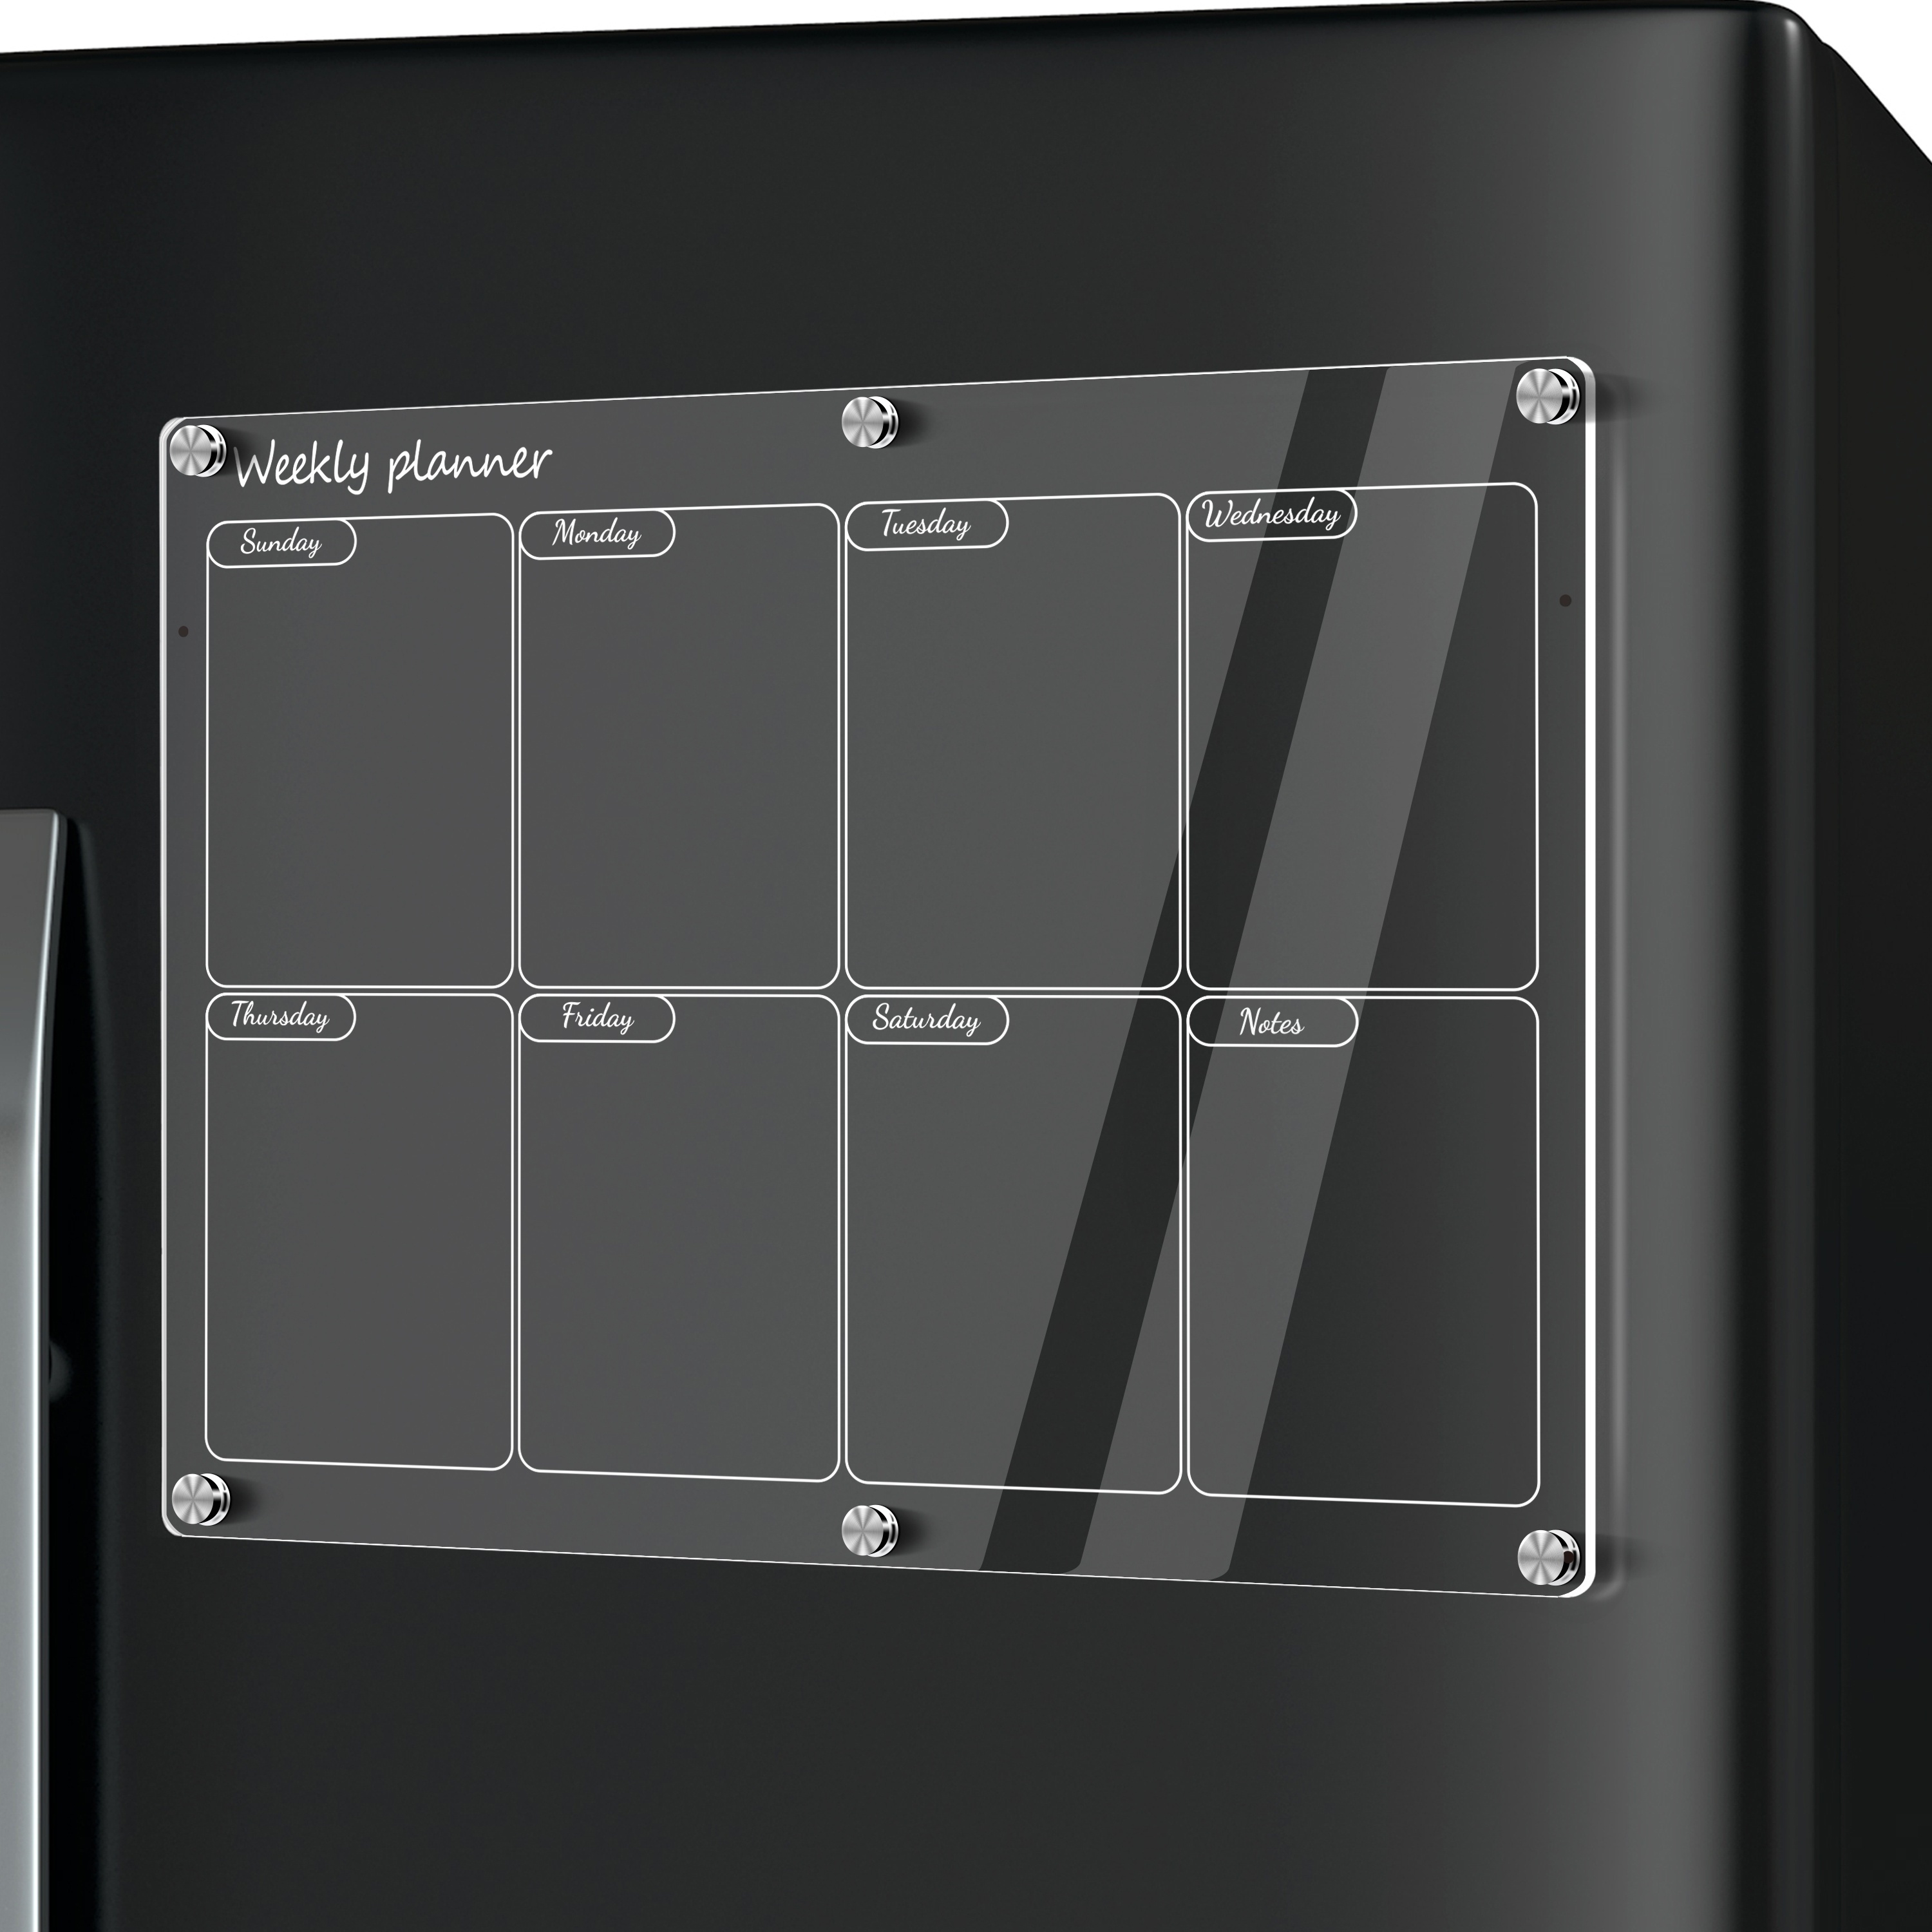 

Acrylic Magnetic Dry Erase Board Calendar For Fridge, Magnetic Weekly Calendar For Refrigerator, Reusable Clear Acrylic Weekly Meal Planner Menu Board For Kitchen (16"x12")